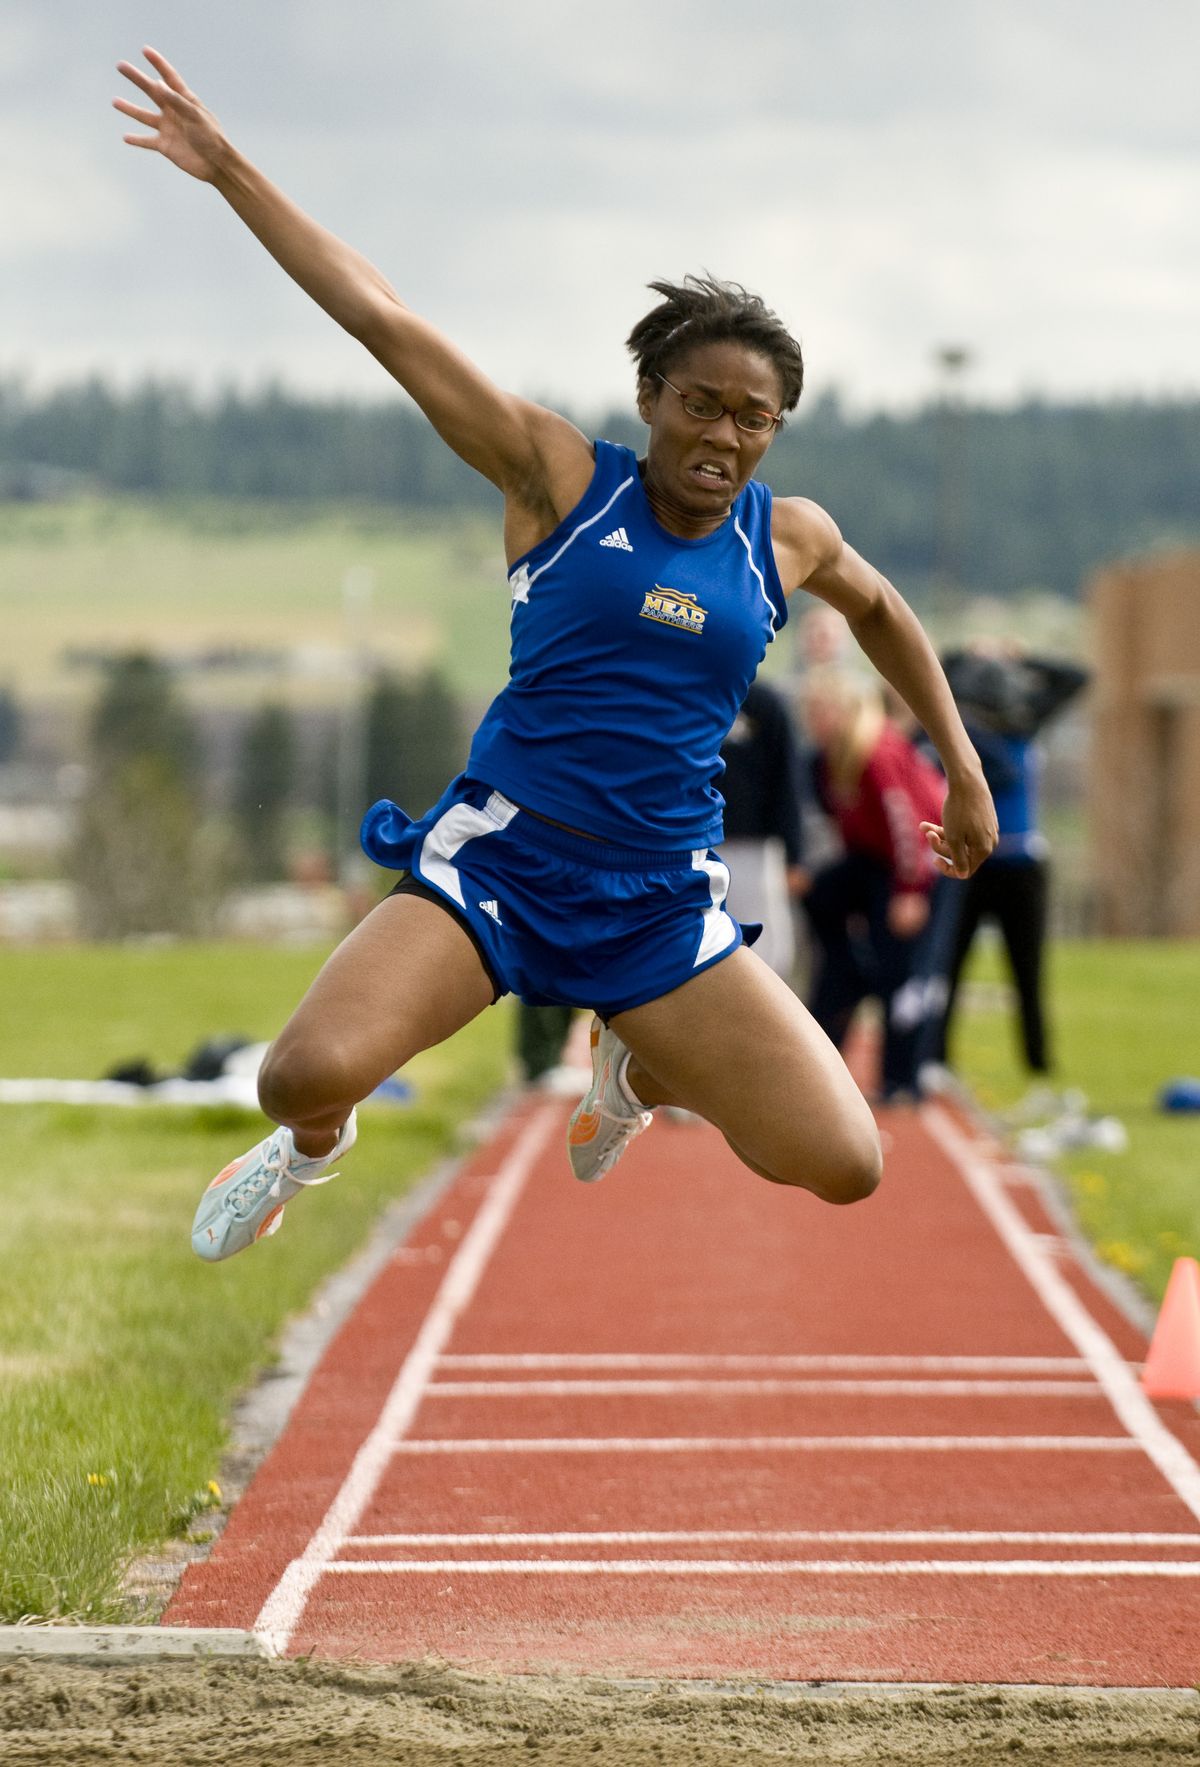 Mead senior Kiersten Green lands a winning triple jump of 34 feet, 7 inches.  (Colin Mulvany / The Spokesman-Review)